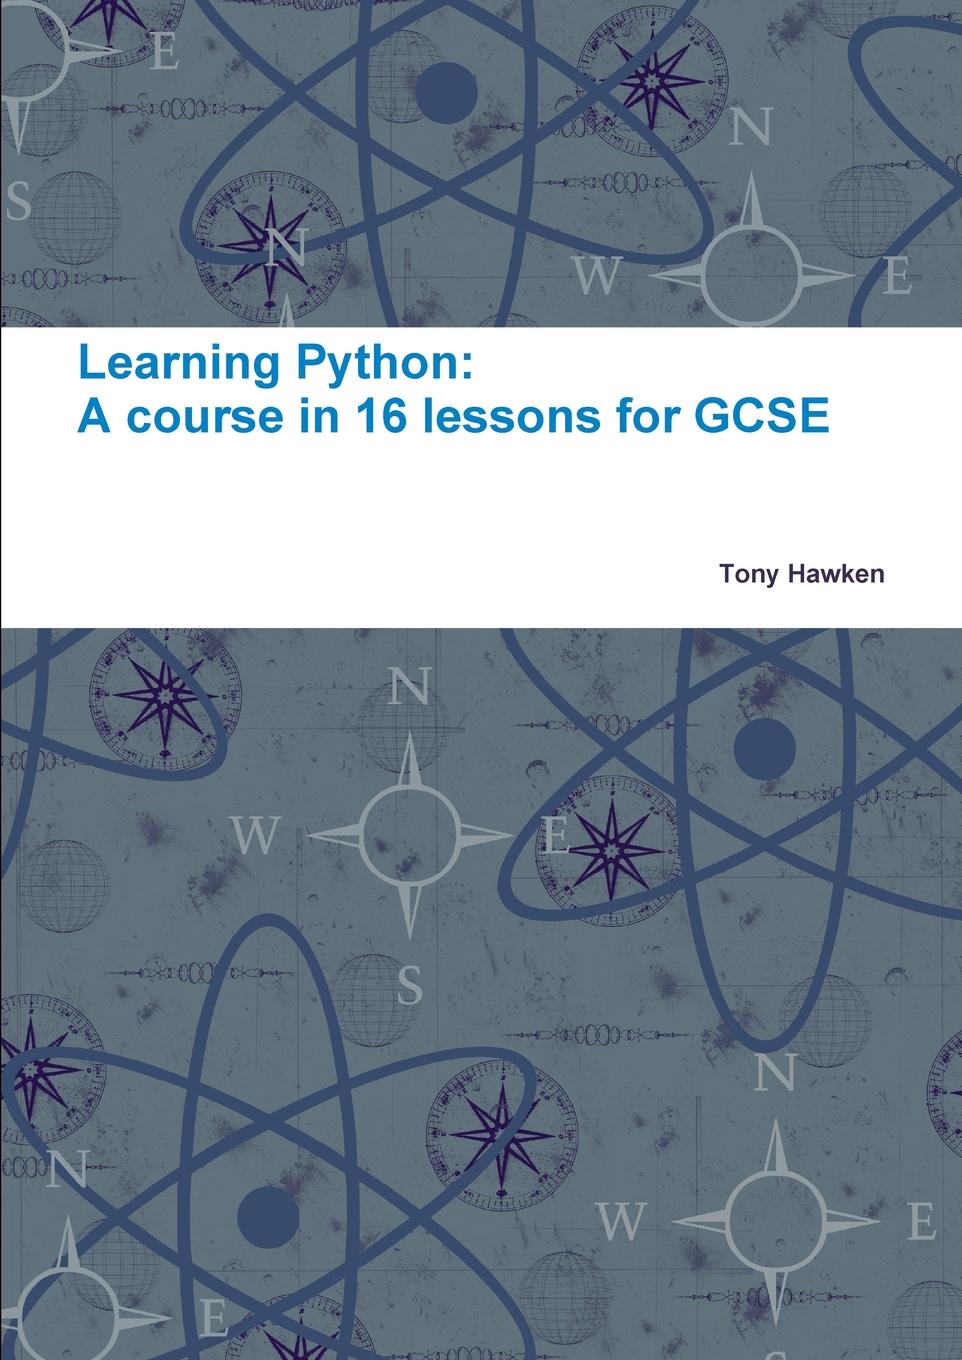 Learning Python. A course in 16 lessons for GCSE